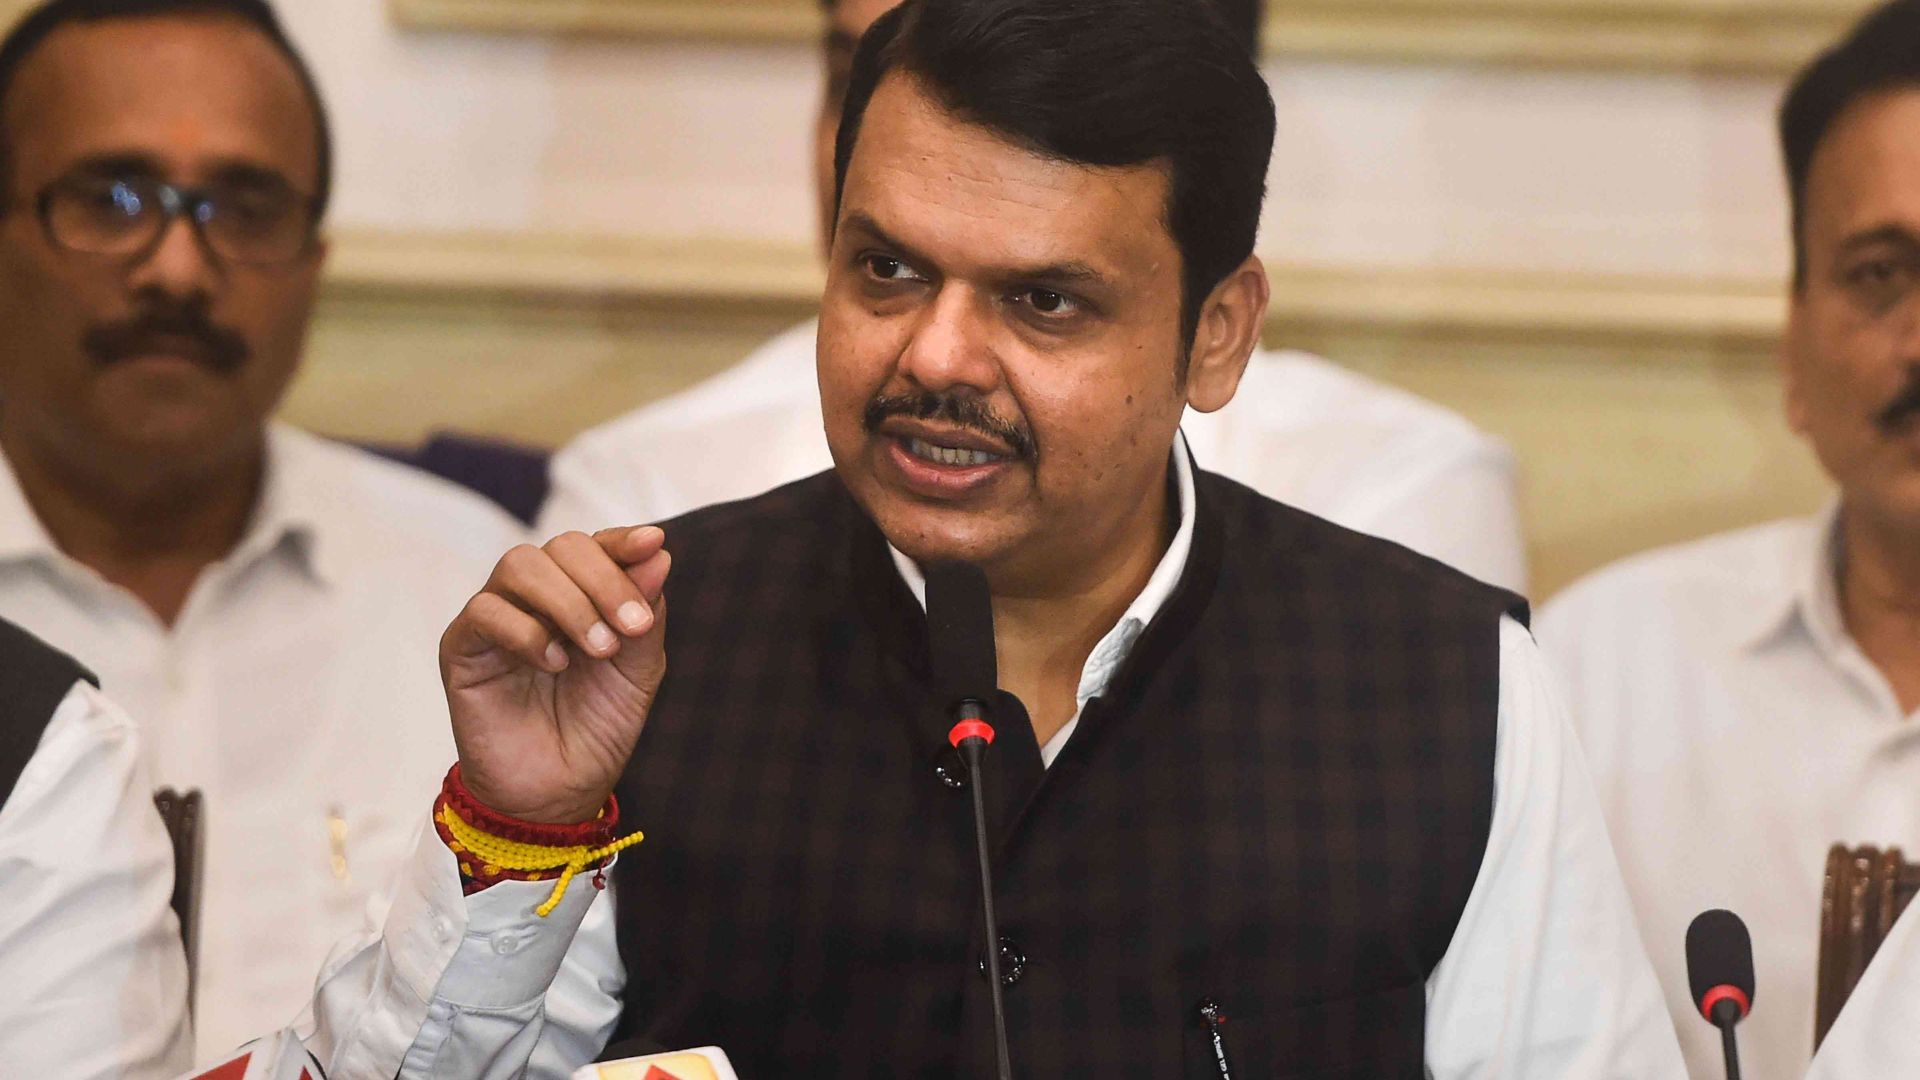 Devendra Fadnavis, former Chief Minister of Maharashtra, speaking at a press conference, offering to resign and taking responsibility for BJP's electoral performance.